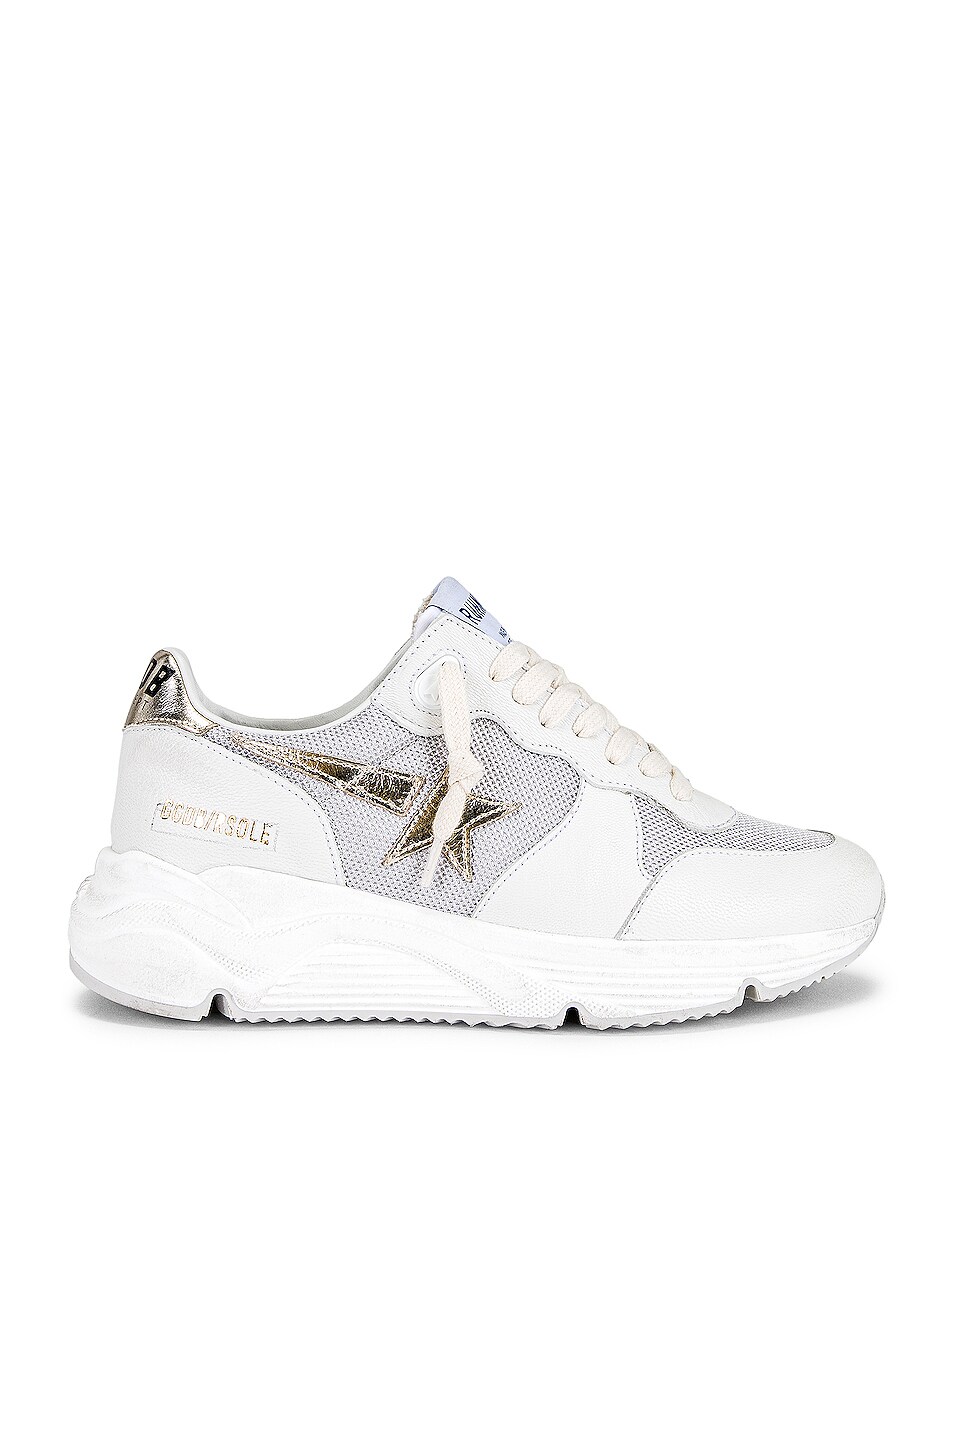 Image 1 of Golden Goose Running Sole Sneaker in Silver, White, & Platinum